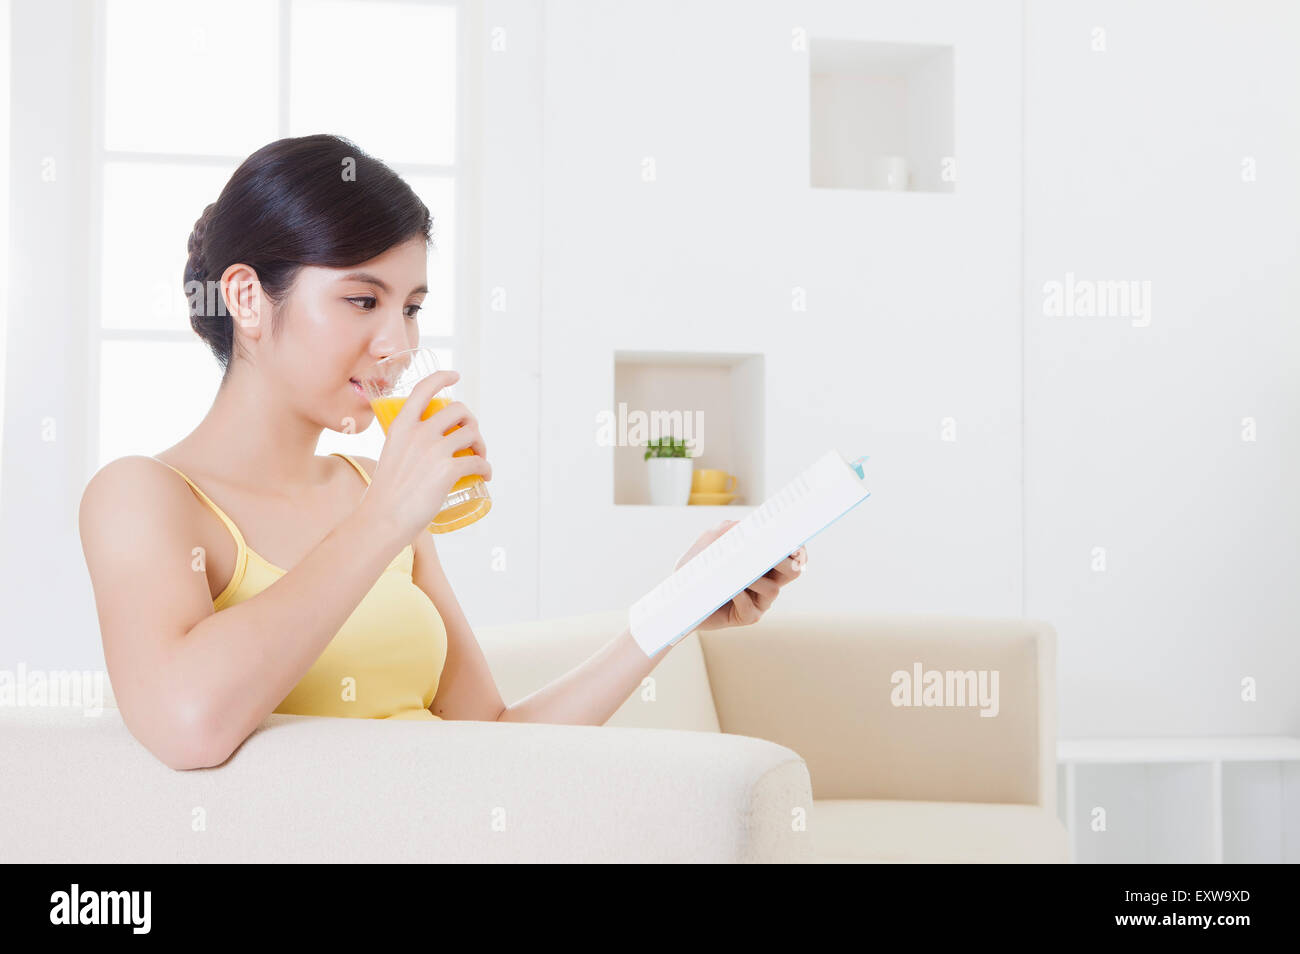 Young woman drinking juice and reading a book, Stock Photo